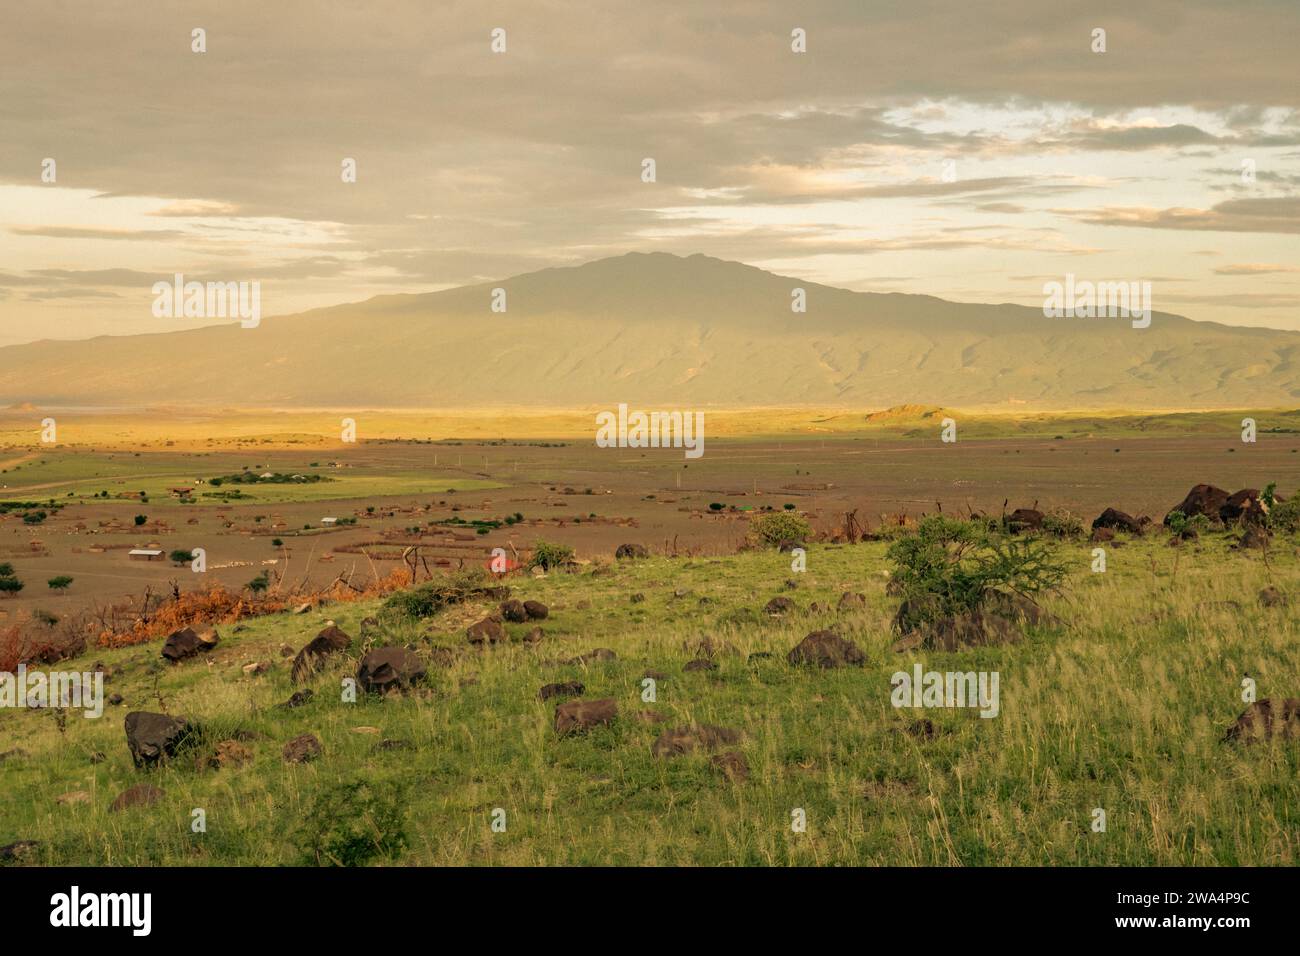 View of masai village against the background of Mount Ol Doinyo Lengai in Ngorongoro Conservationa Area in Tanzania Stock Photo